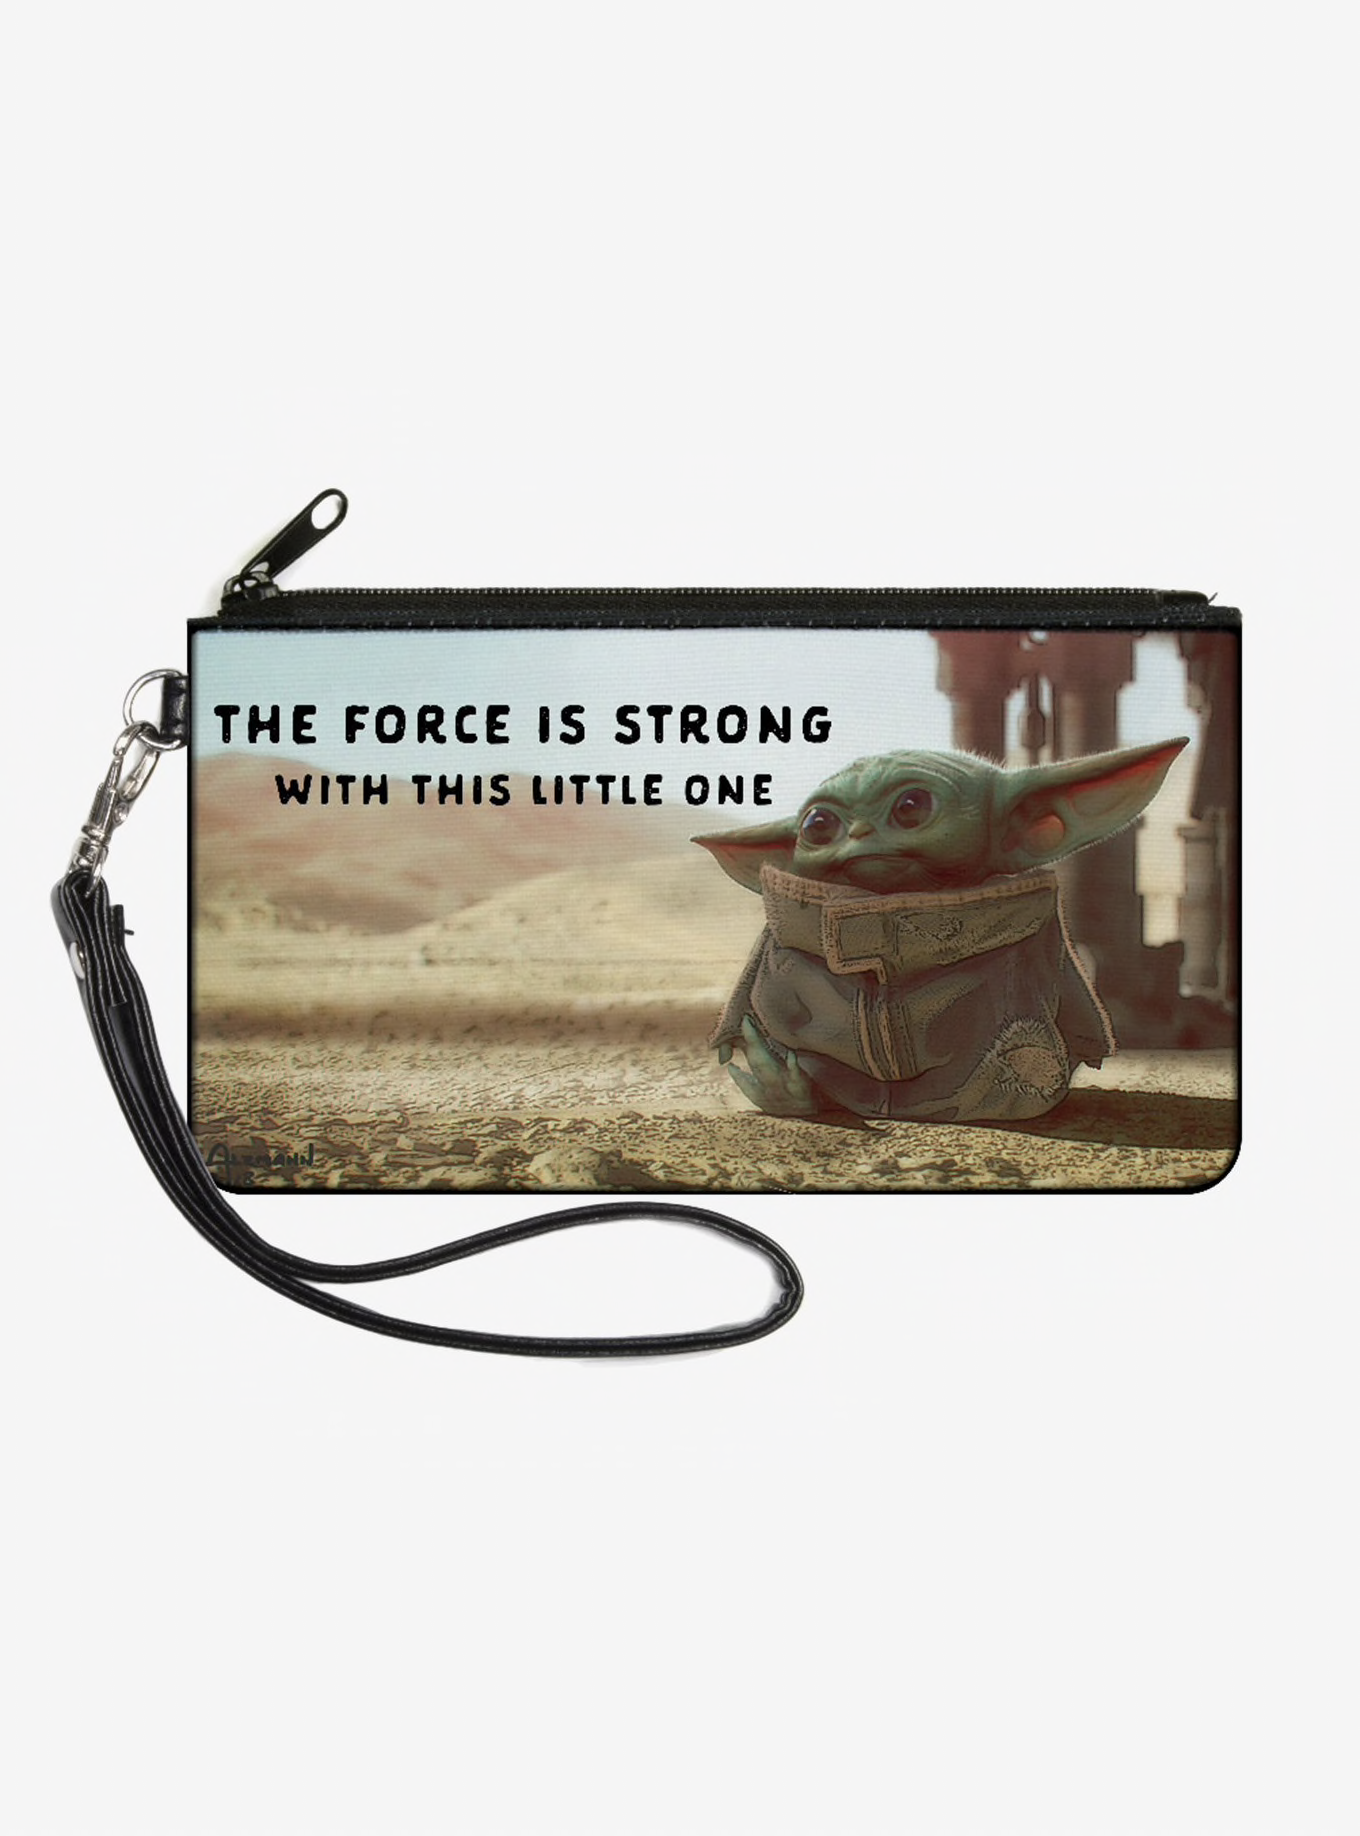 Star Wars The Mandalorian The Child The Force is Strong Wallet Canvas Zip Clutch